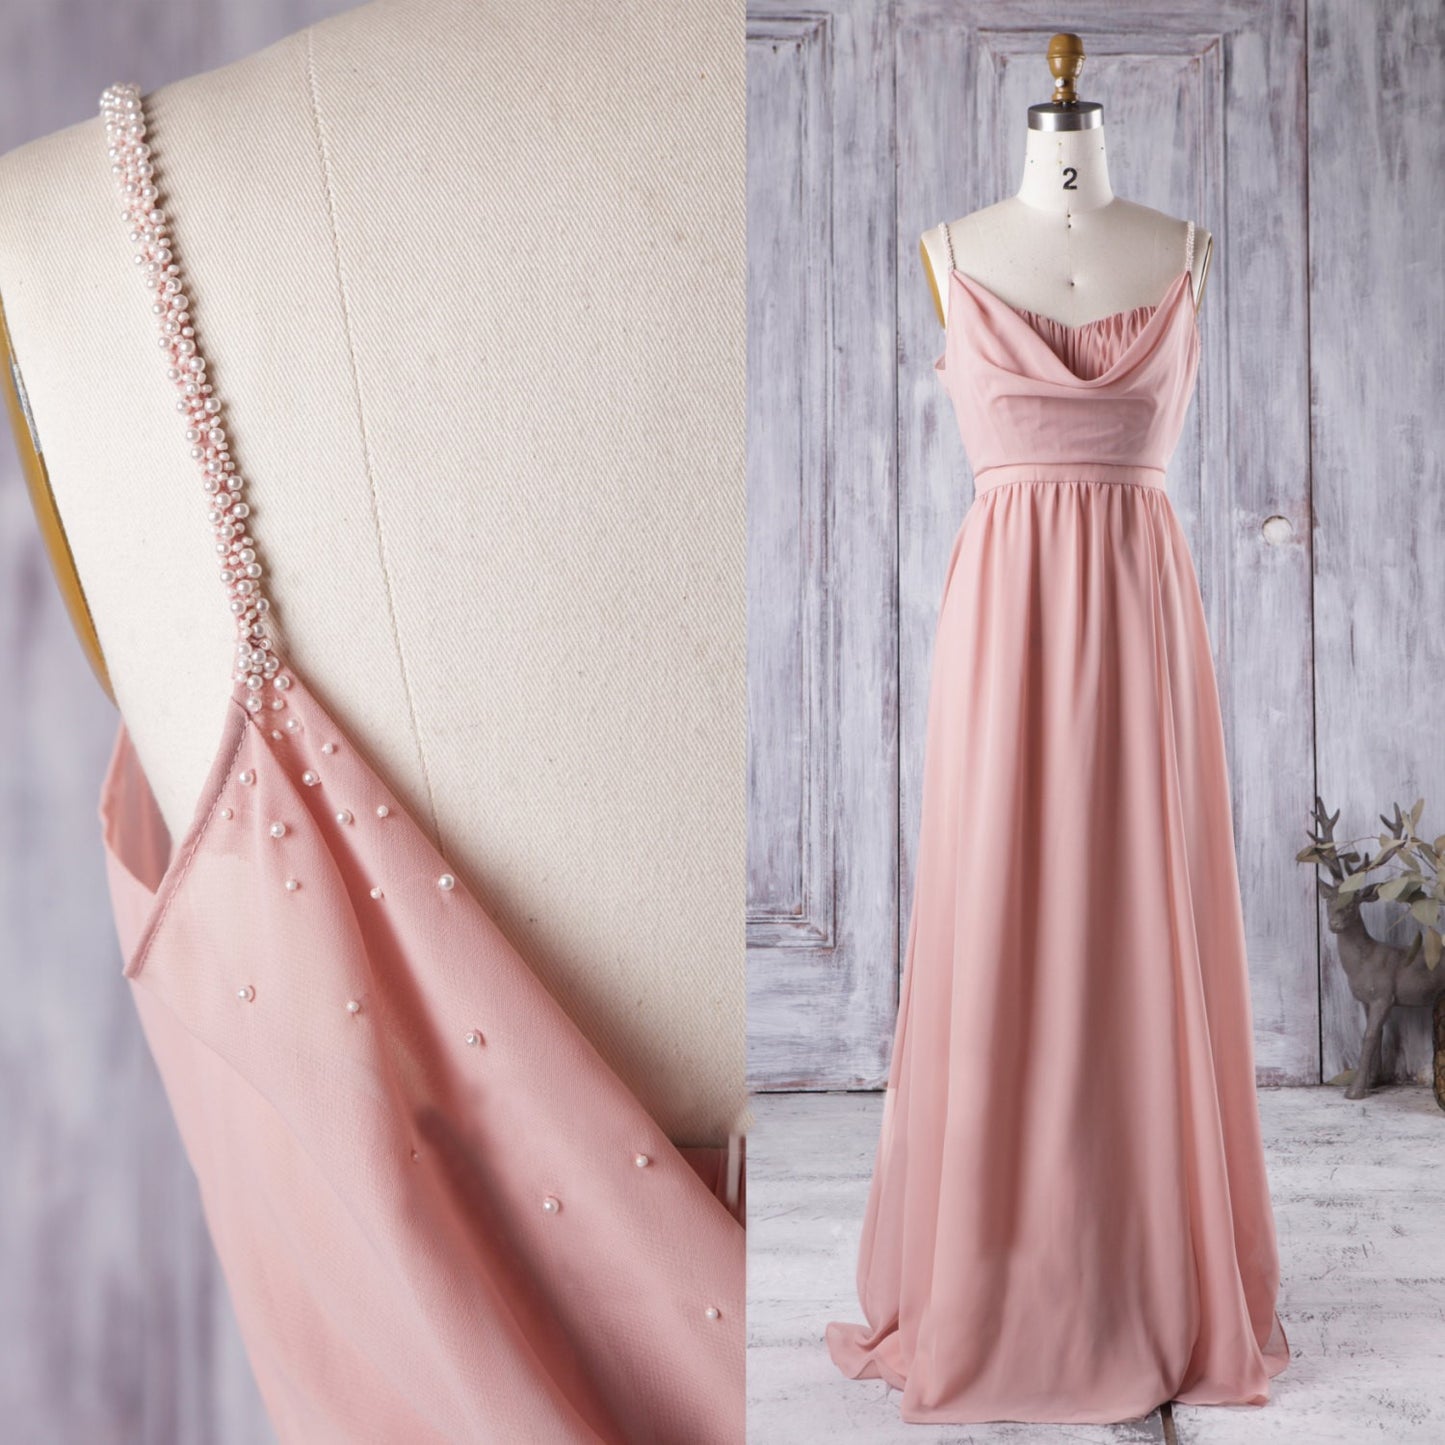 strappy-boho-bridesmaid-dress-with-pearls-straps-2